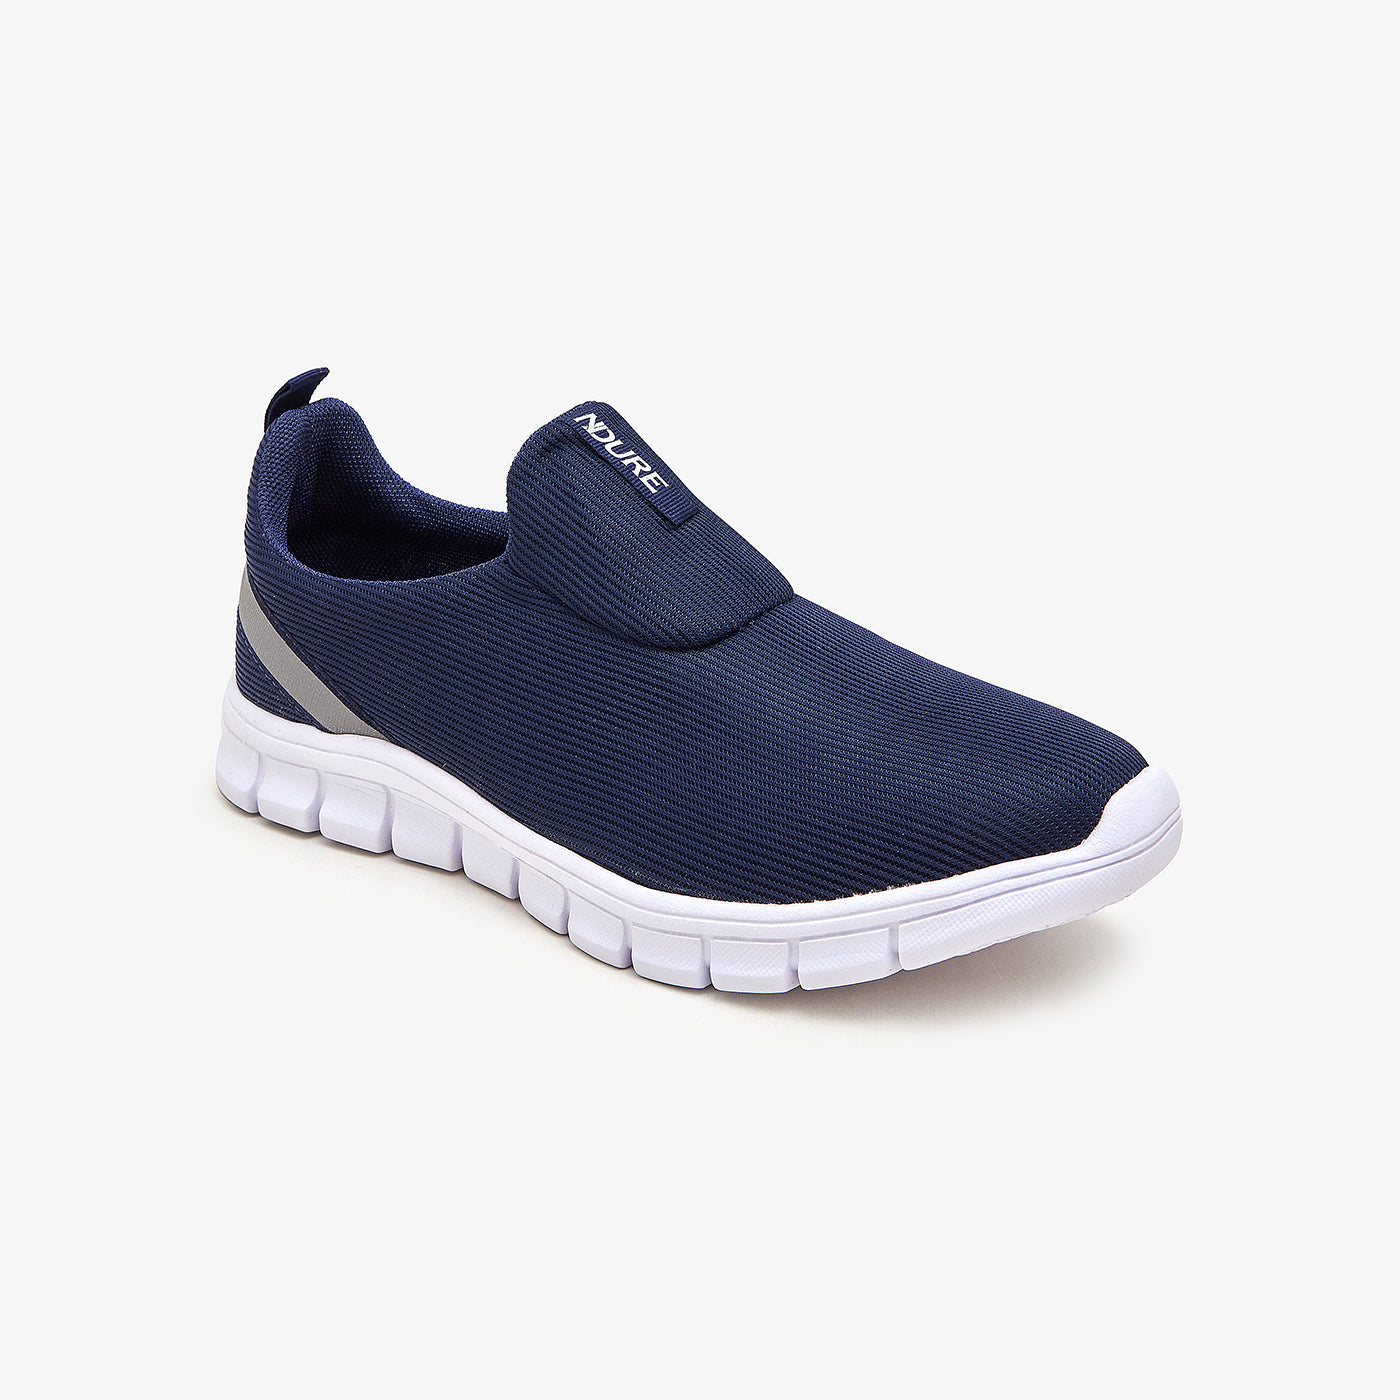 Buy Men Sneakers & Sports Shoes - Comfy Slip-On Athletic Shoes M